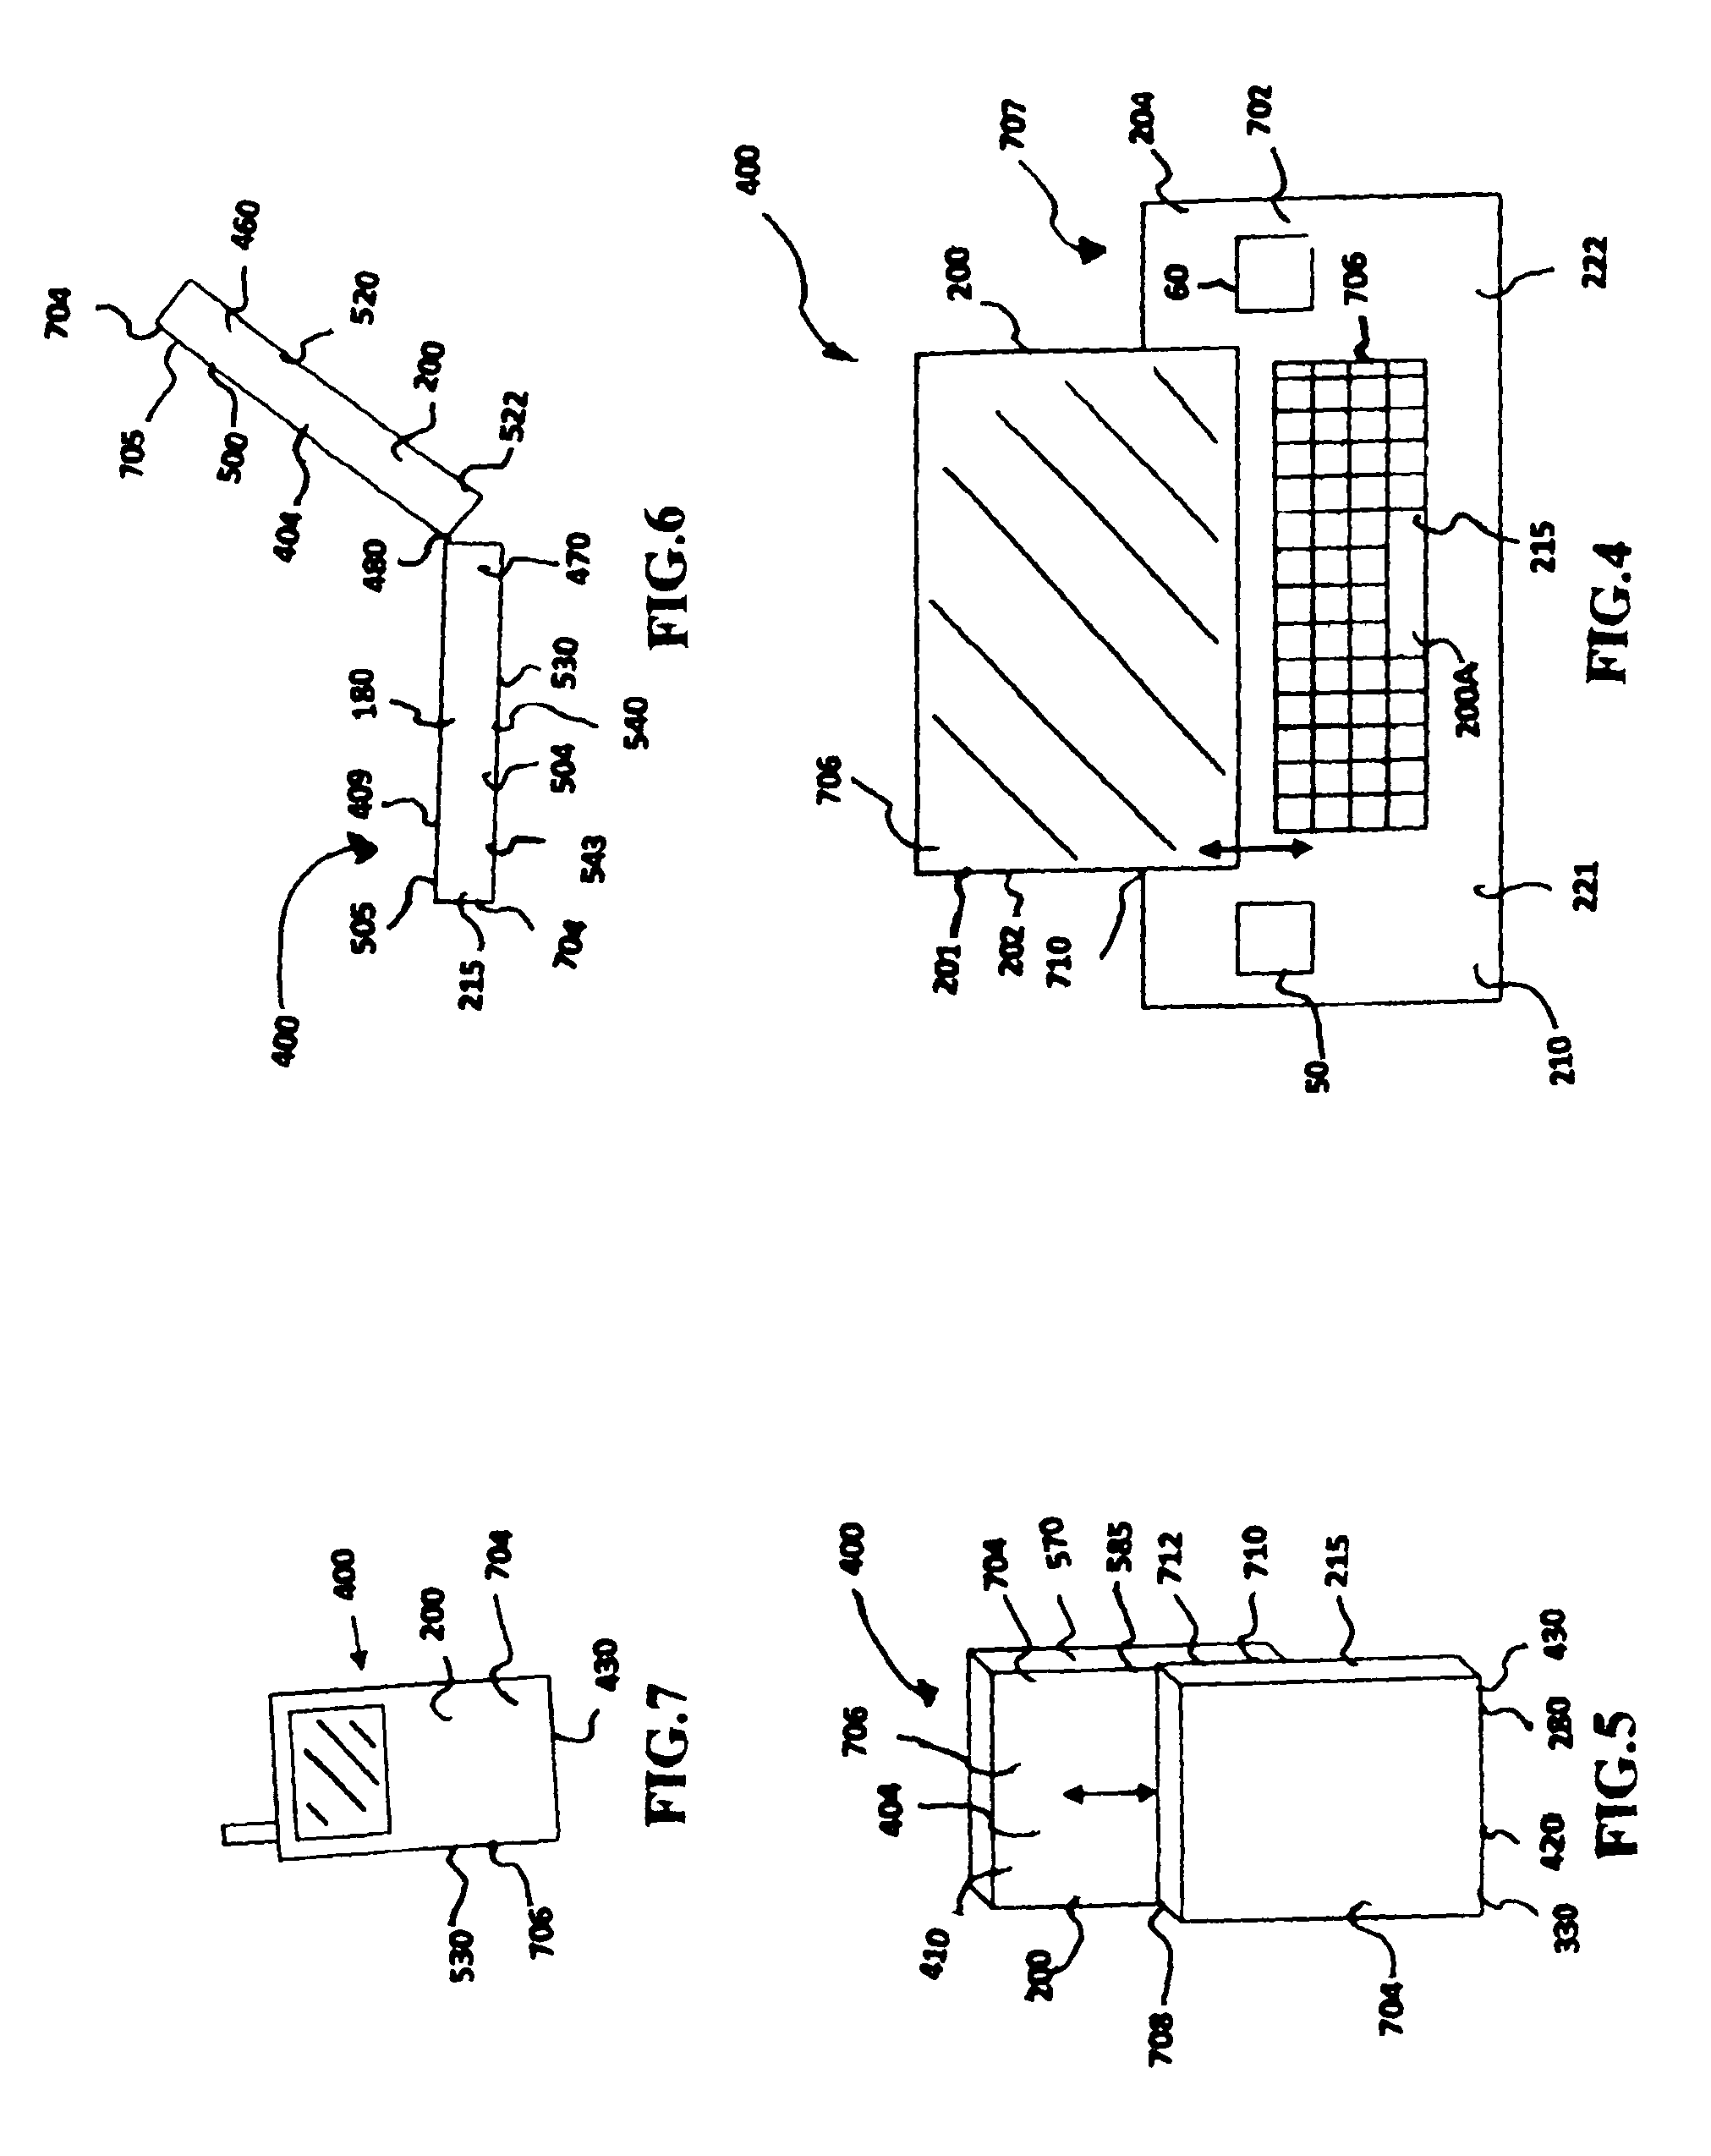 Energy harvesting mega communication device and media apparatus configured with apparatus for boosting signal reception